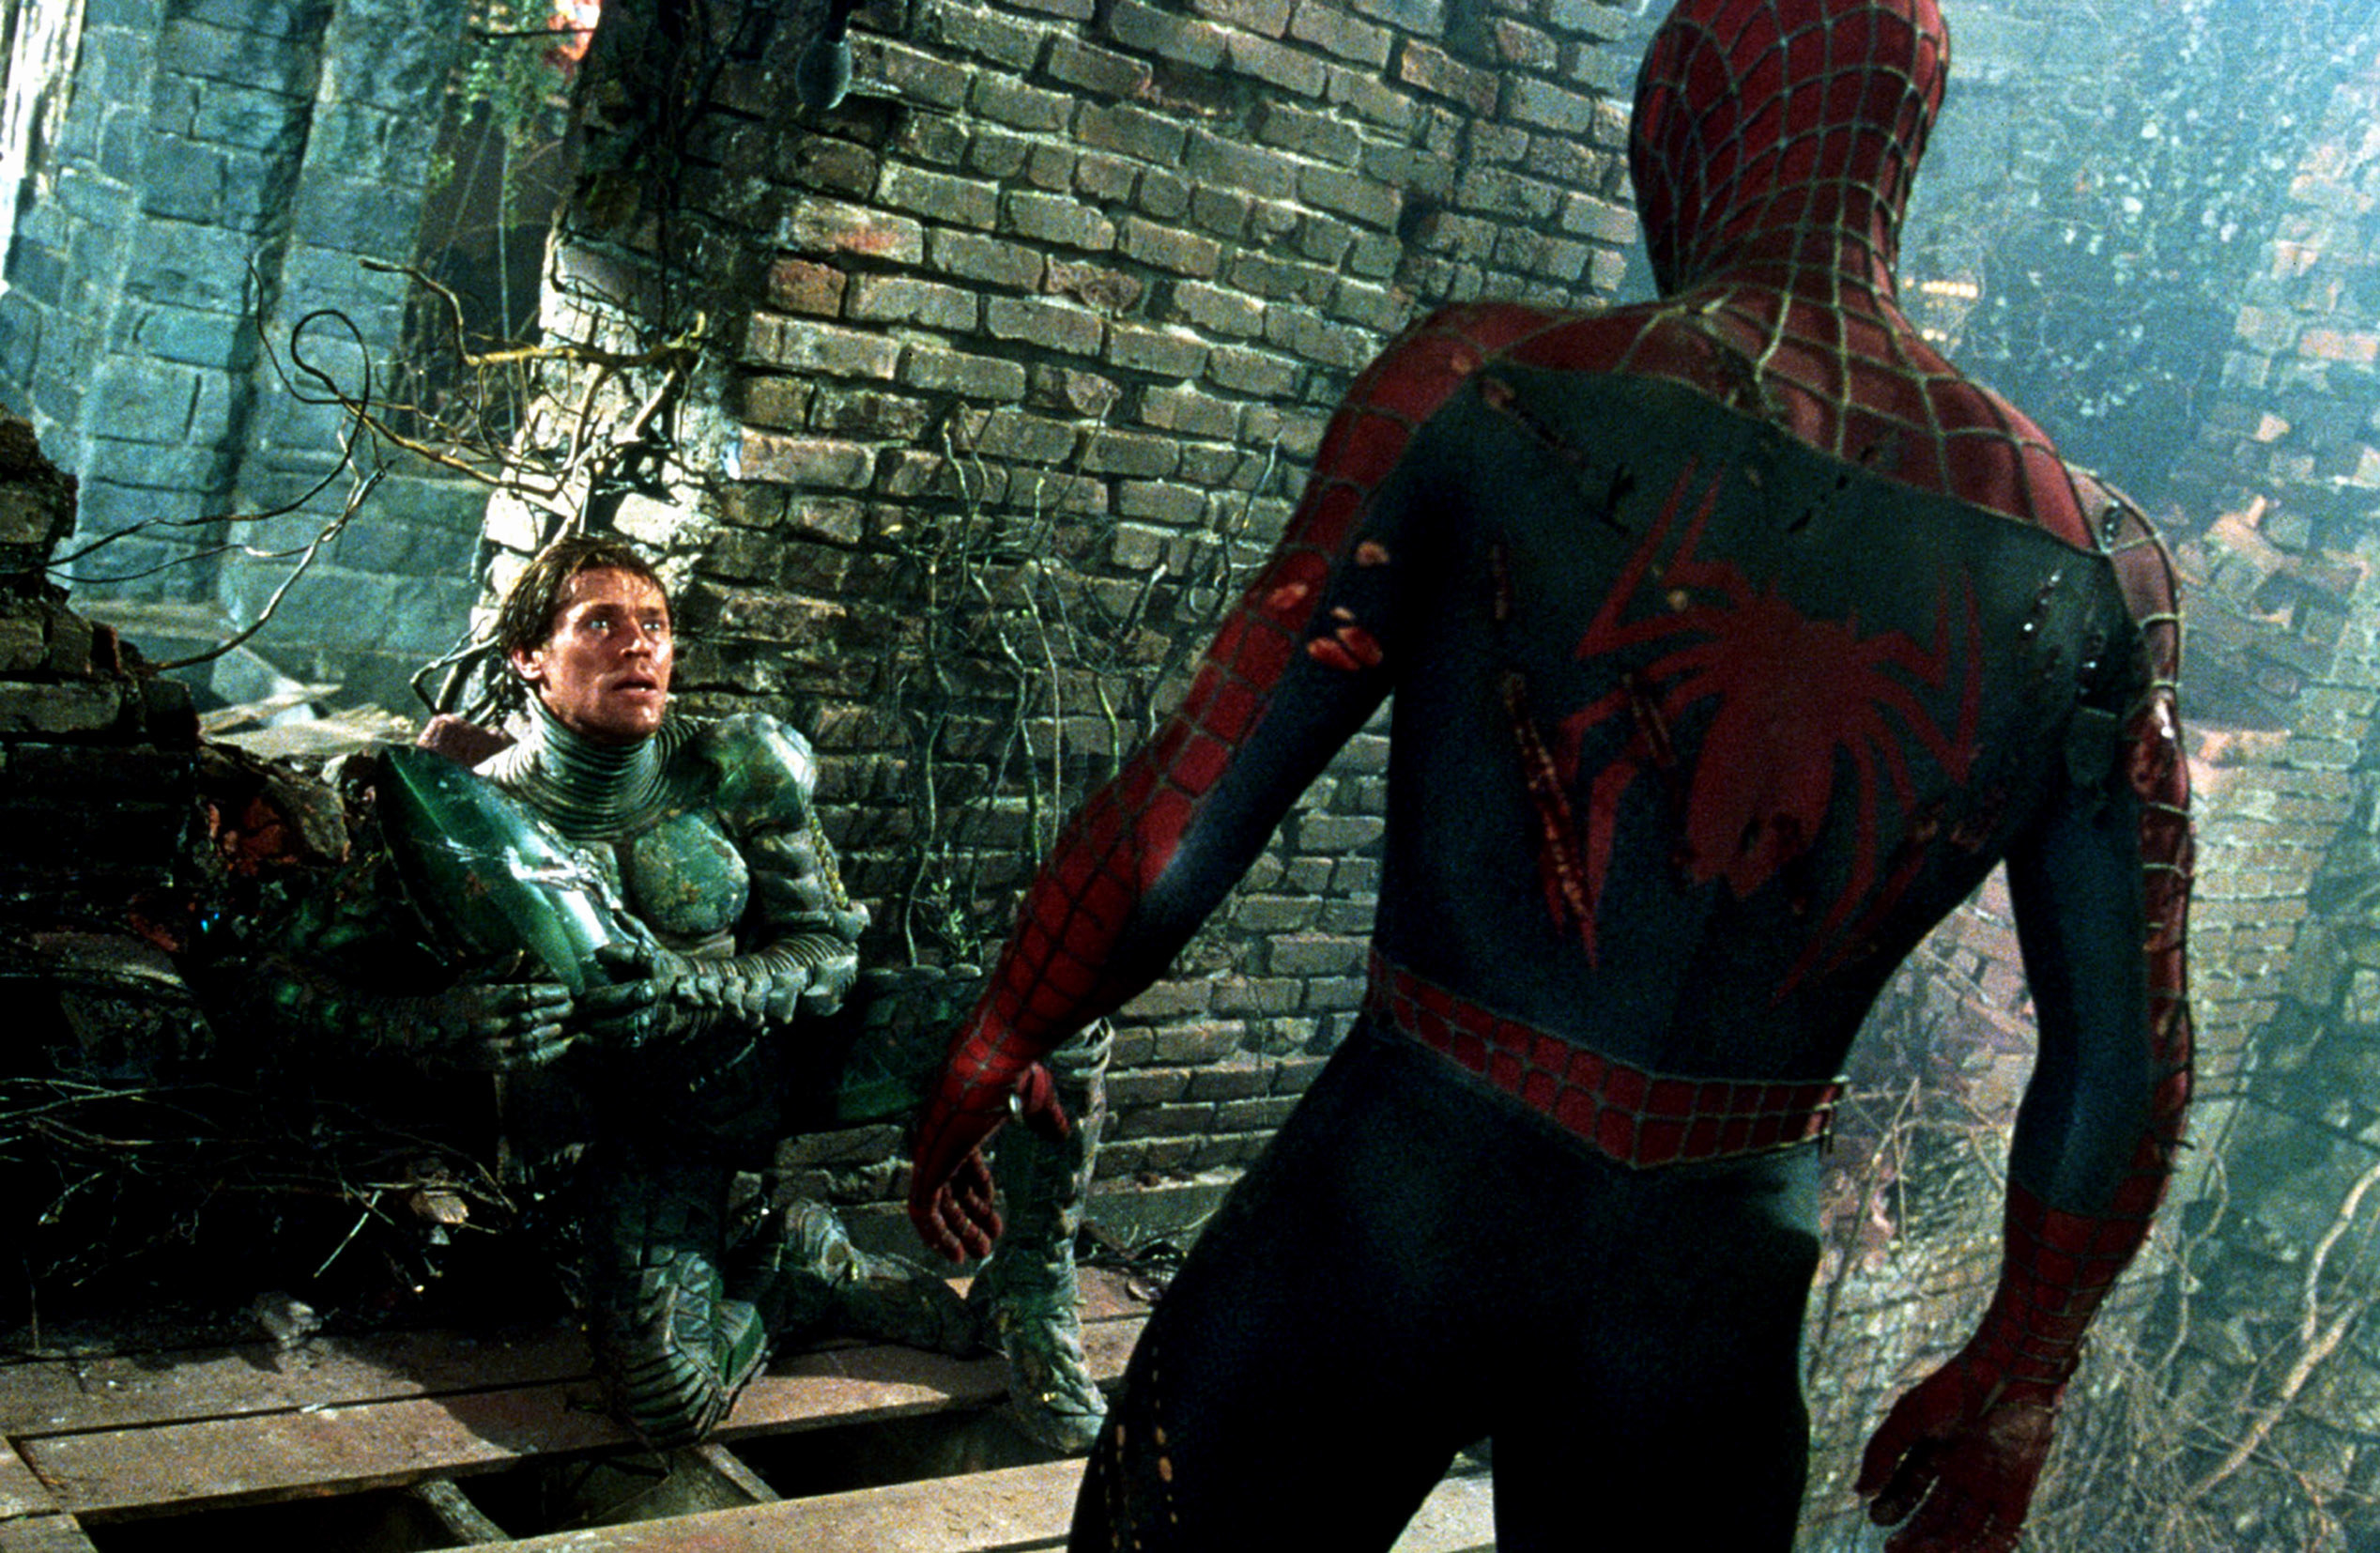 An unmasked Green Goblin as Spider-Man stand in front of him